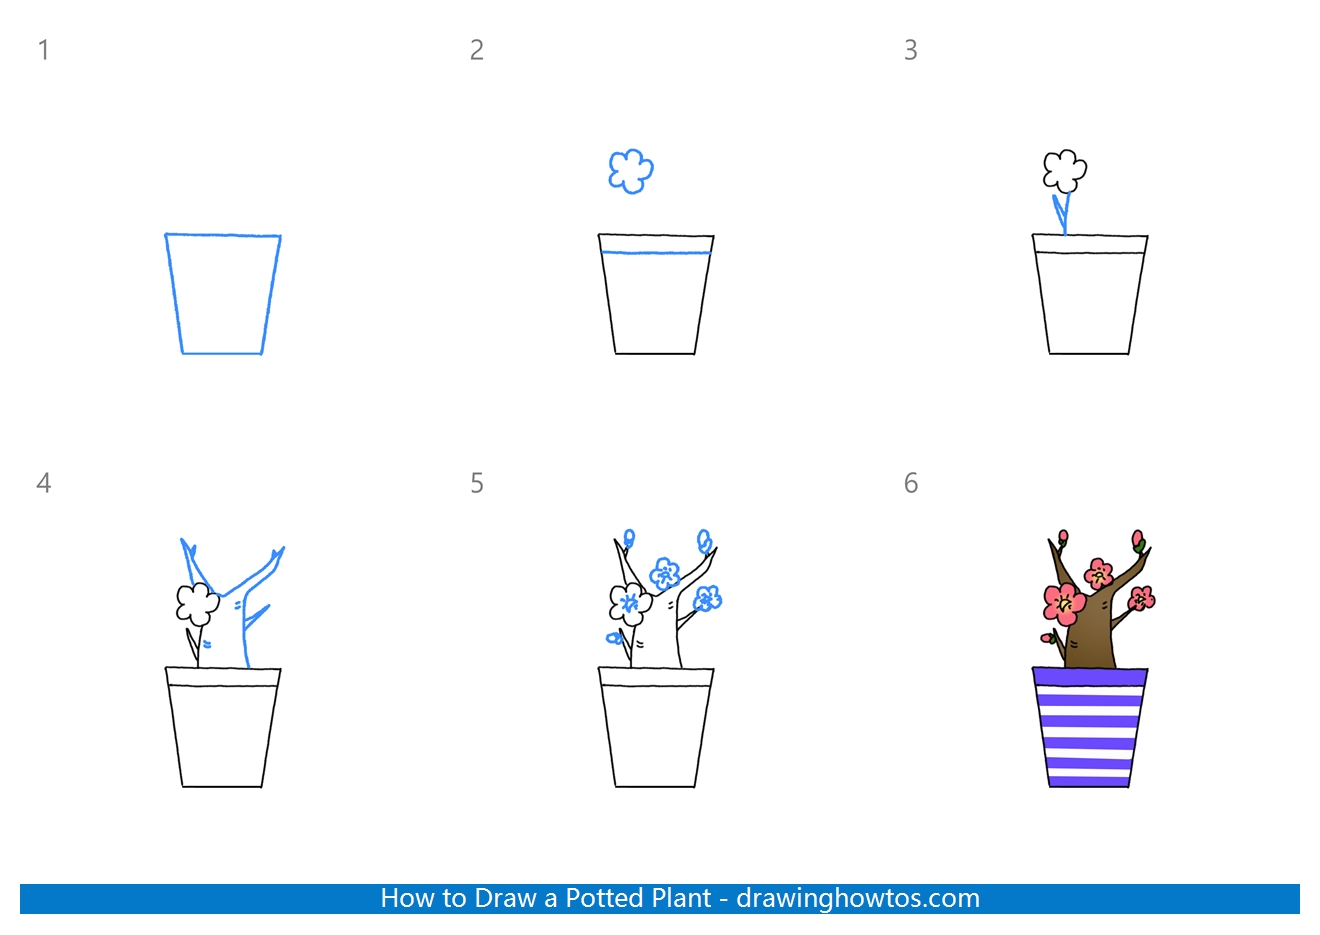 How to Draw a Potted Plant Step by Step